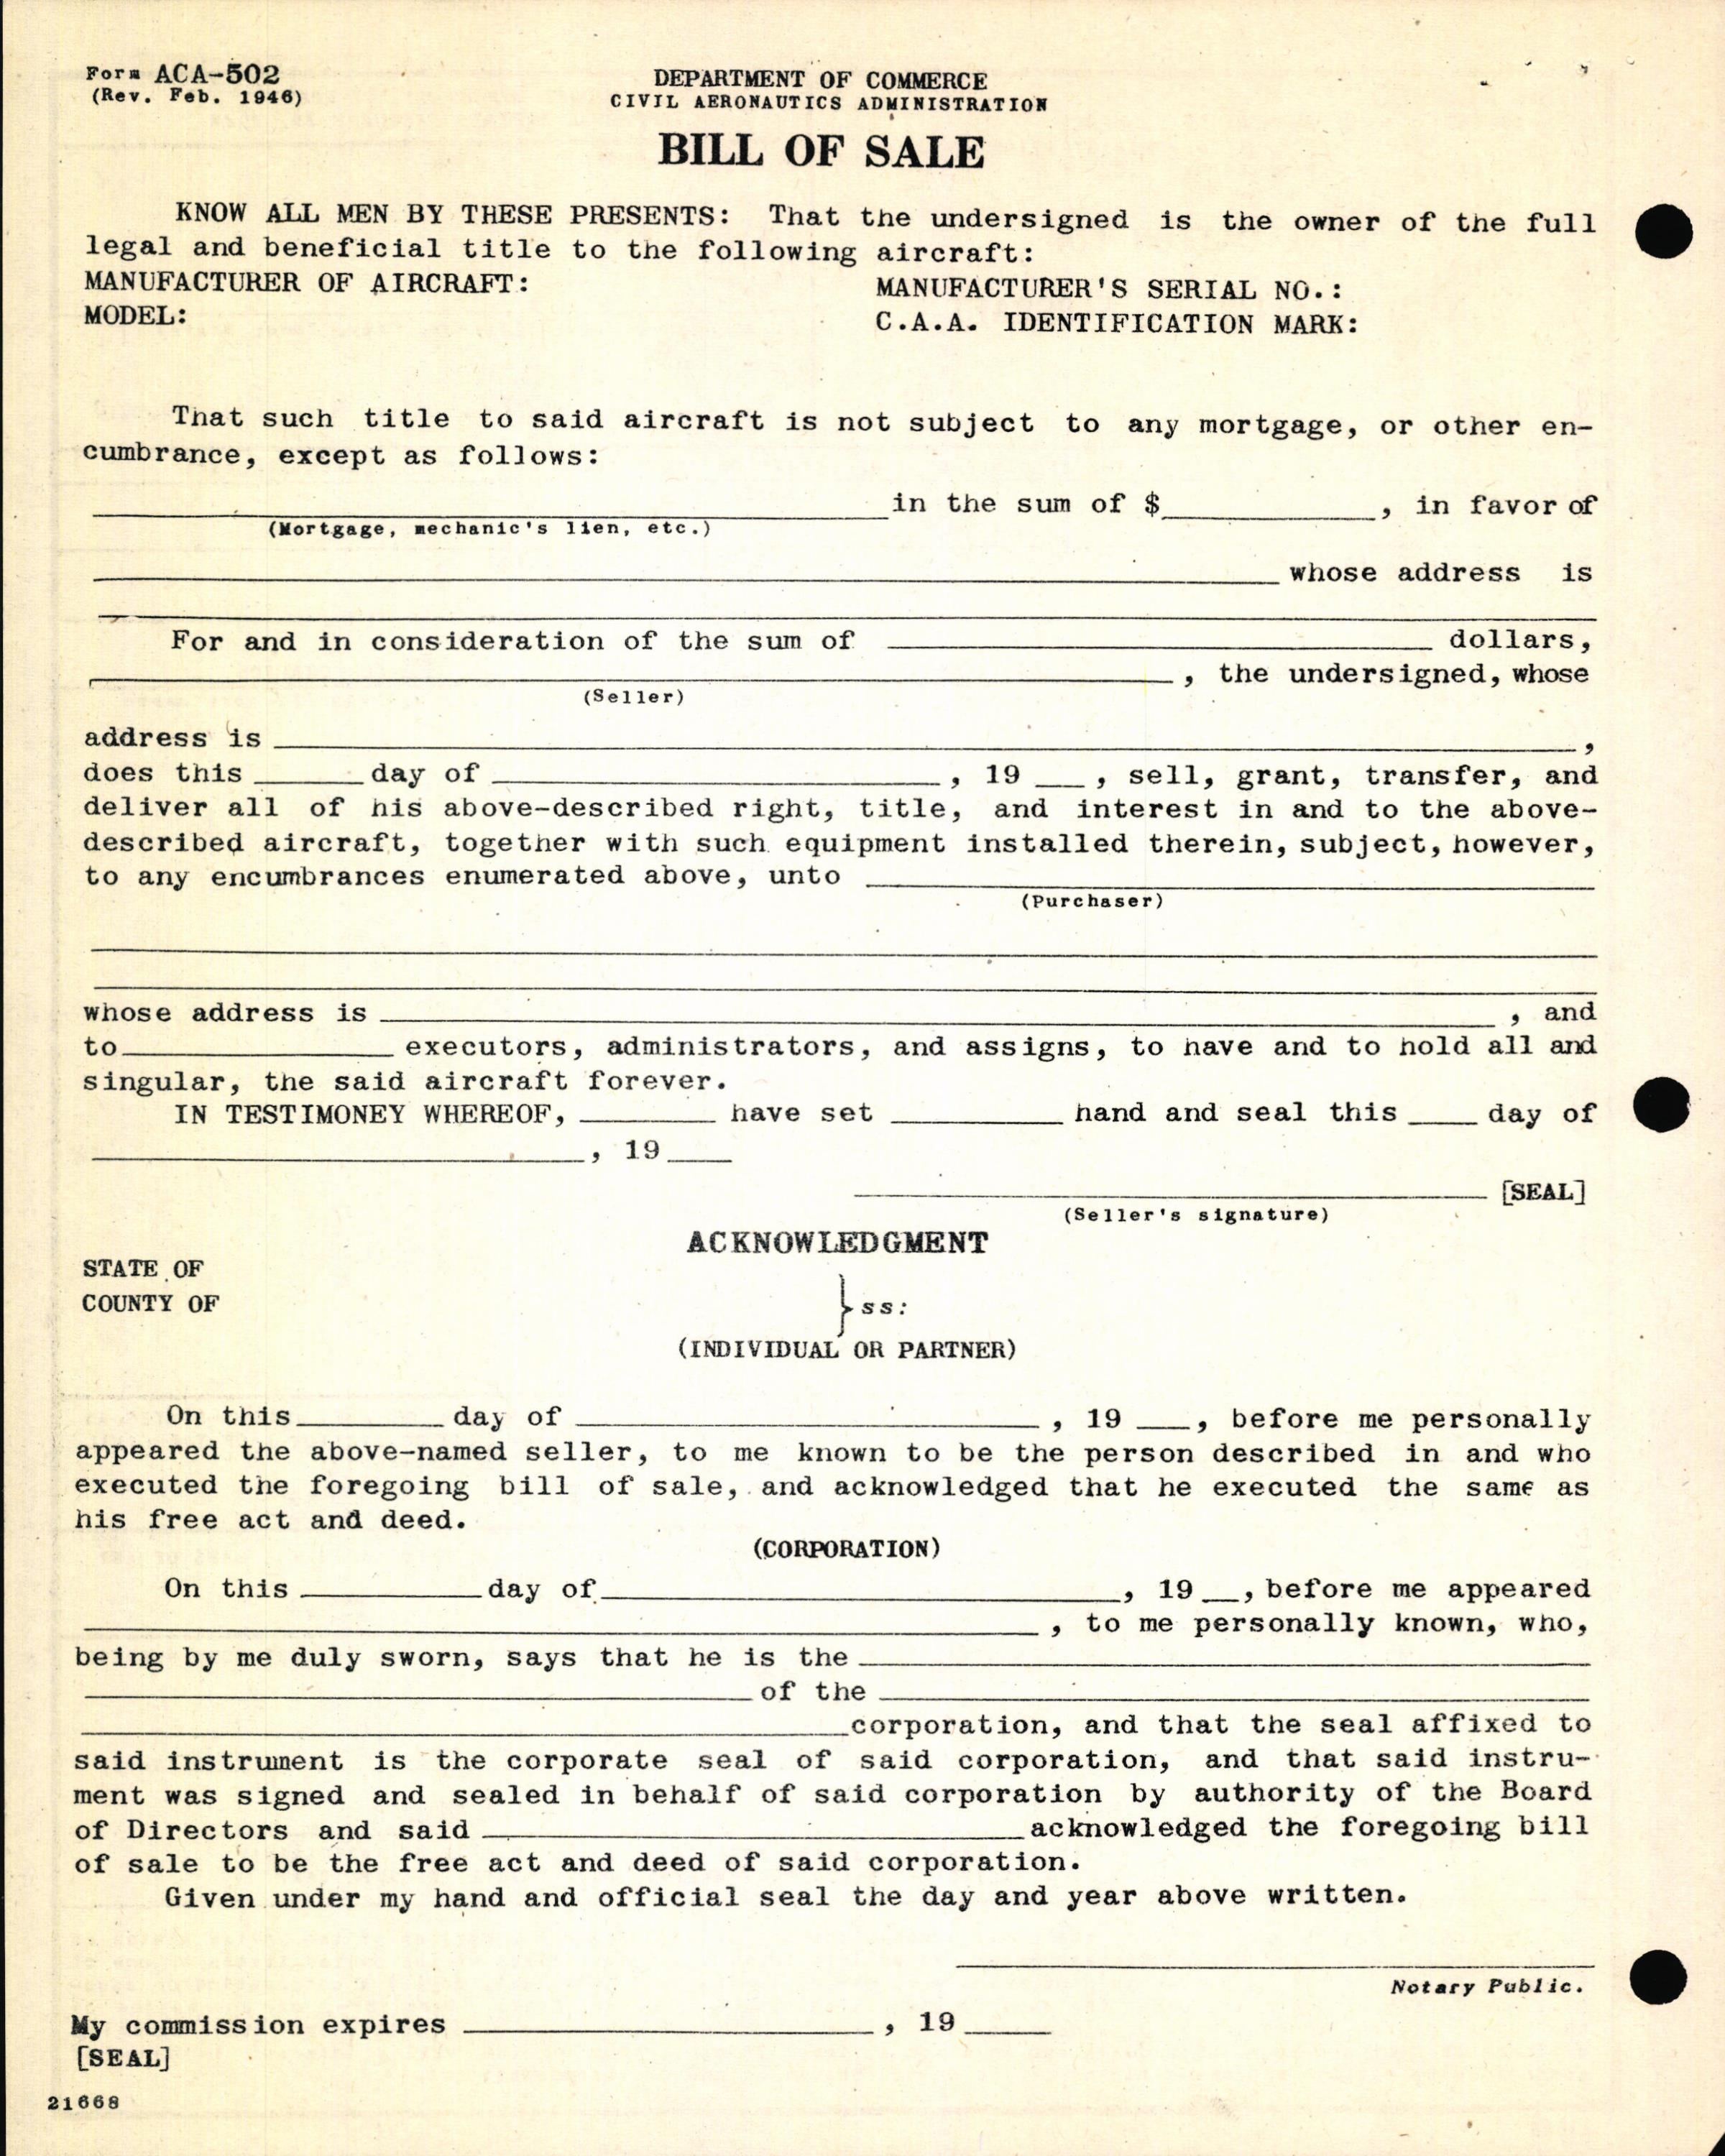 Sample page 6 from AirCorps Library document: Technical Information for Serial Number 1253